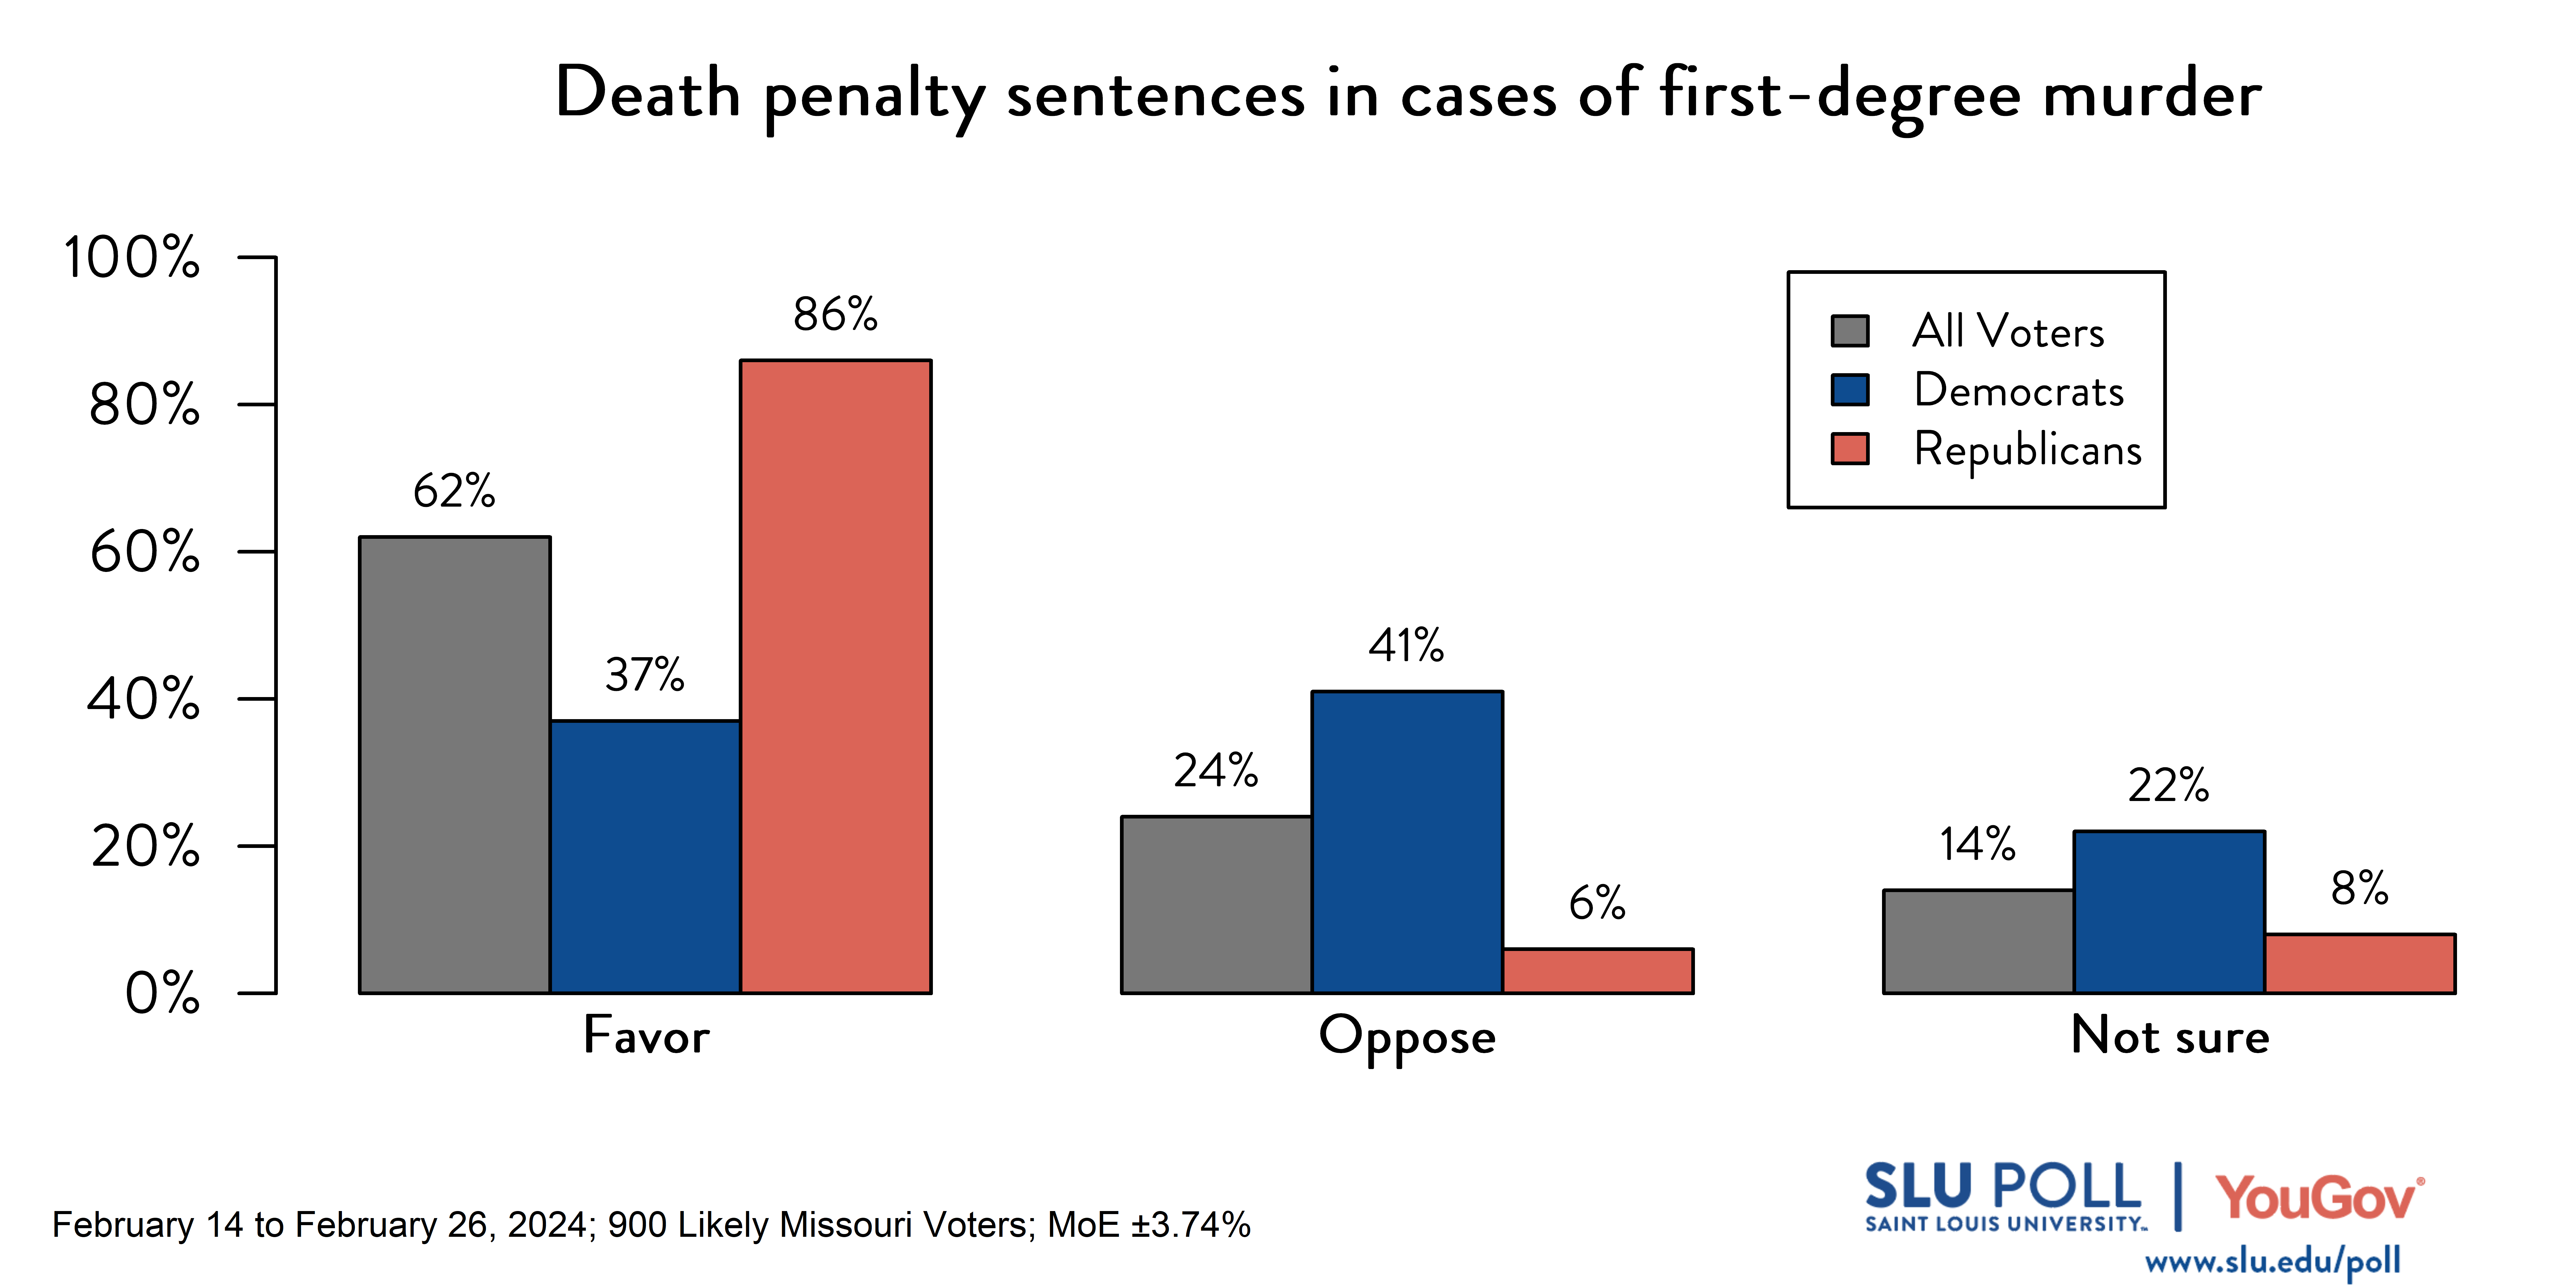 Likely voters' responses to 'Do you favor or oppose the following in the state of Missouri…Death penalty sentences in cases of first-degree murder?': 62% Favor, 24% Oppose, and 14% Not Sure. Democratic voters' responses: ' 37% Favor, 41% Oppose, and 22% Not Sure. Republican voters' responses:  86% Favor, 6% Oppose, and 8% Not Sure.